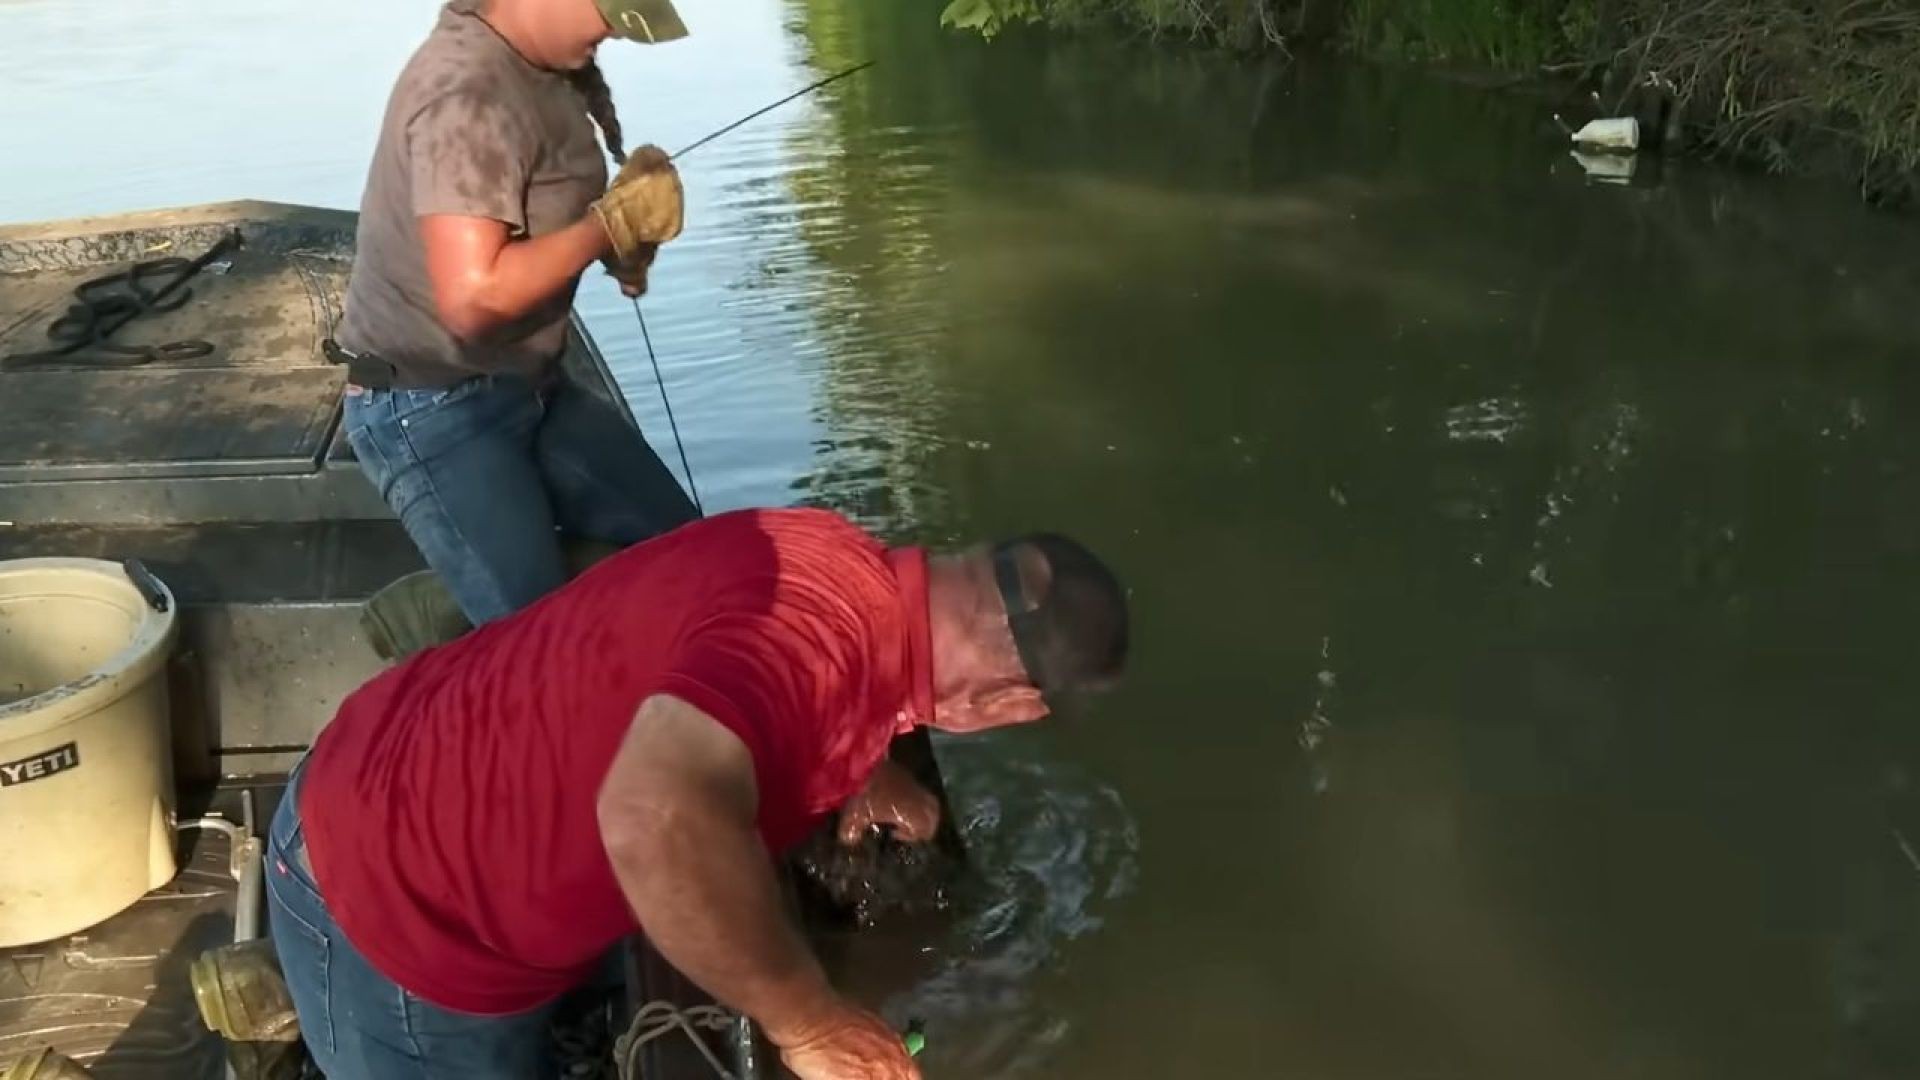 Swamp People: The Battle with Jaws – A Gator Tale of Epic Proportions